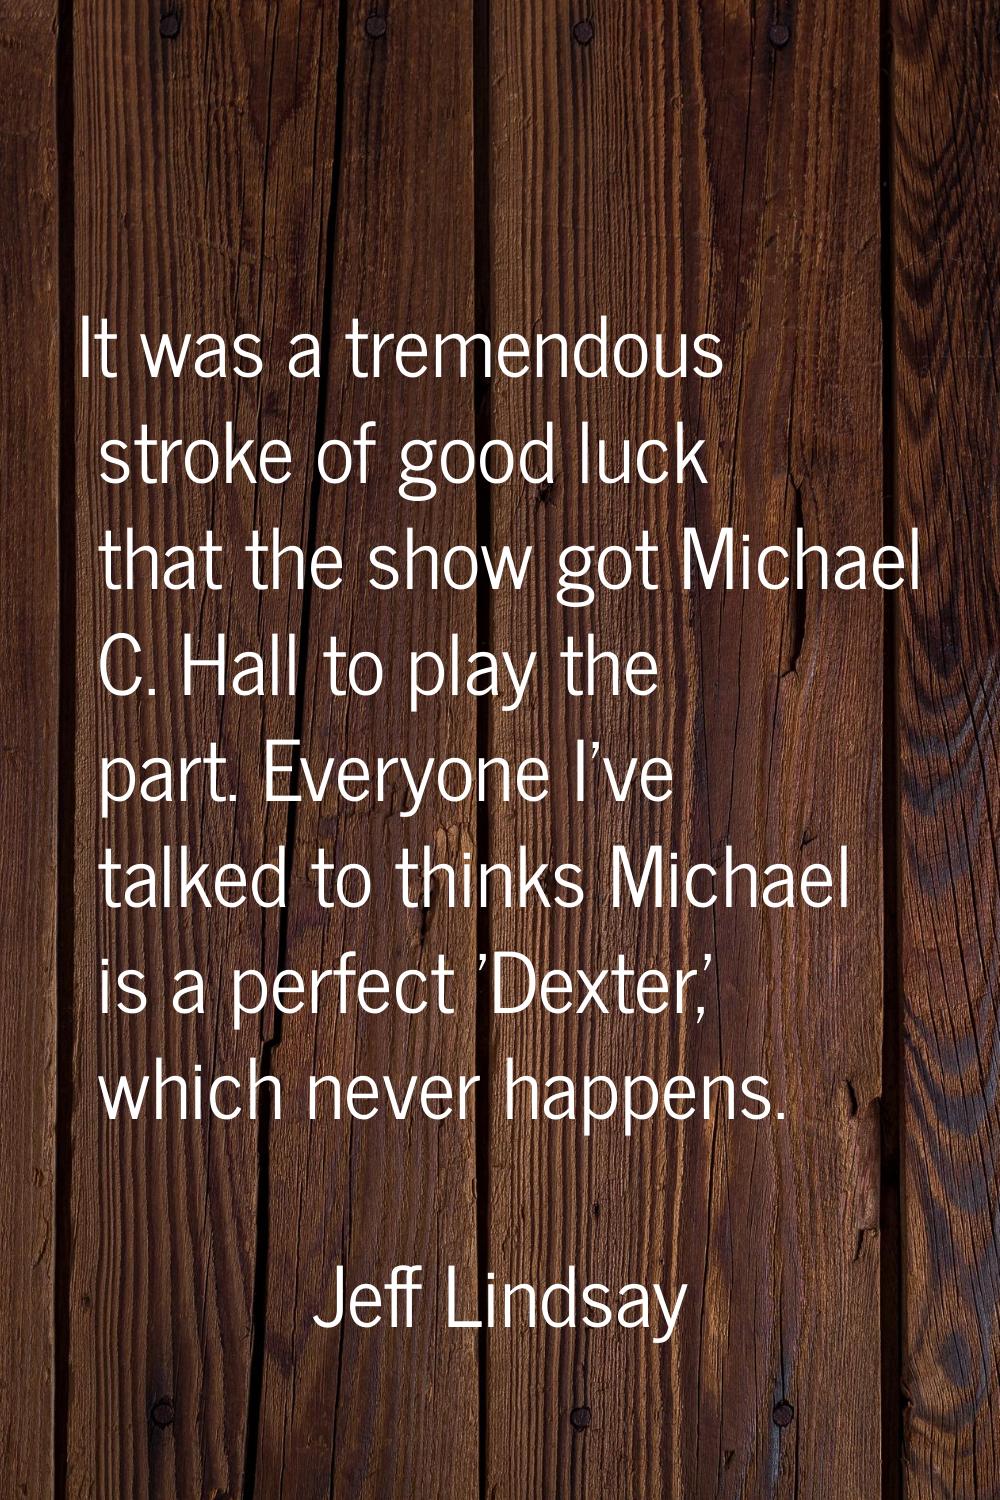 It was a tremendous stroke of good luck that the show got Michael C. Hall to play the part. Everyon